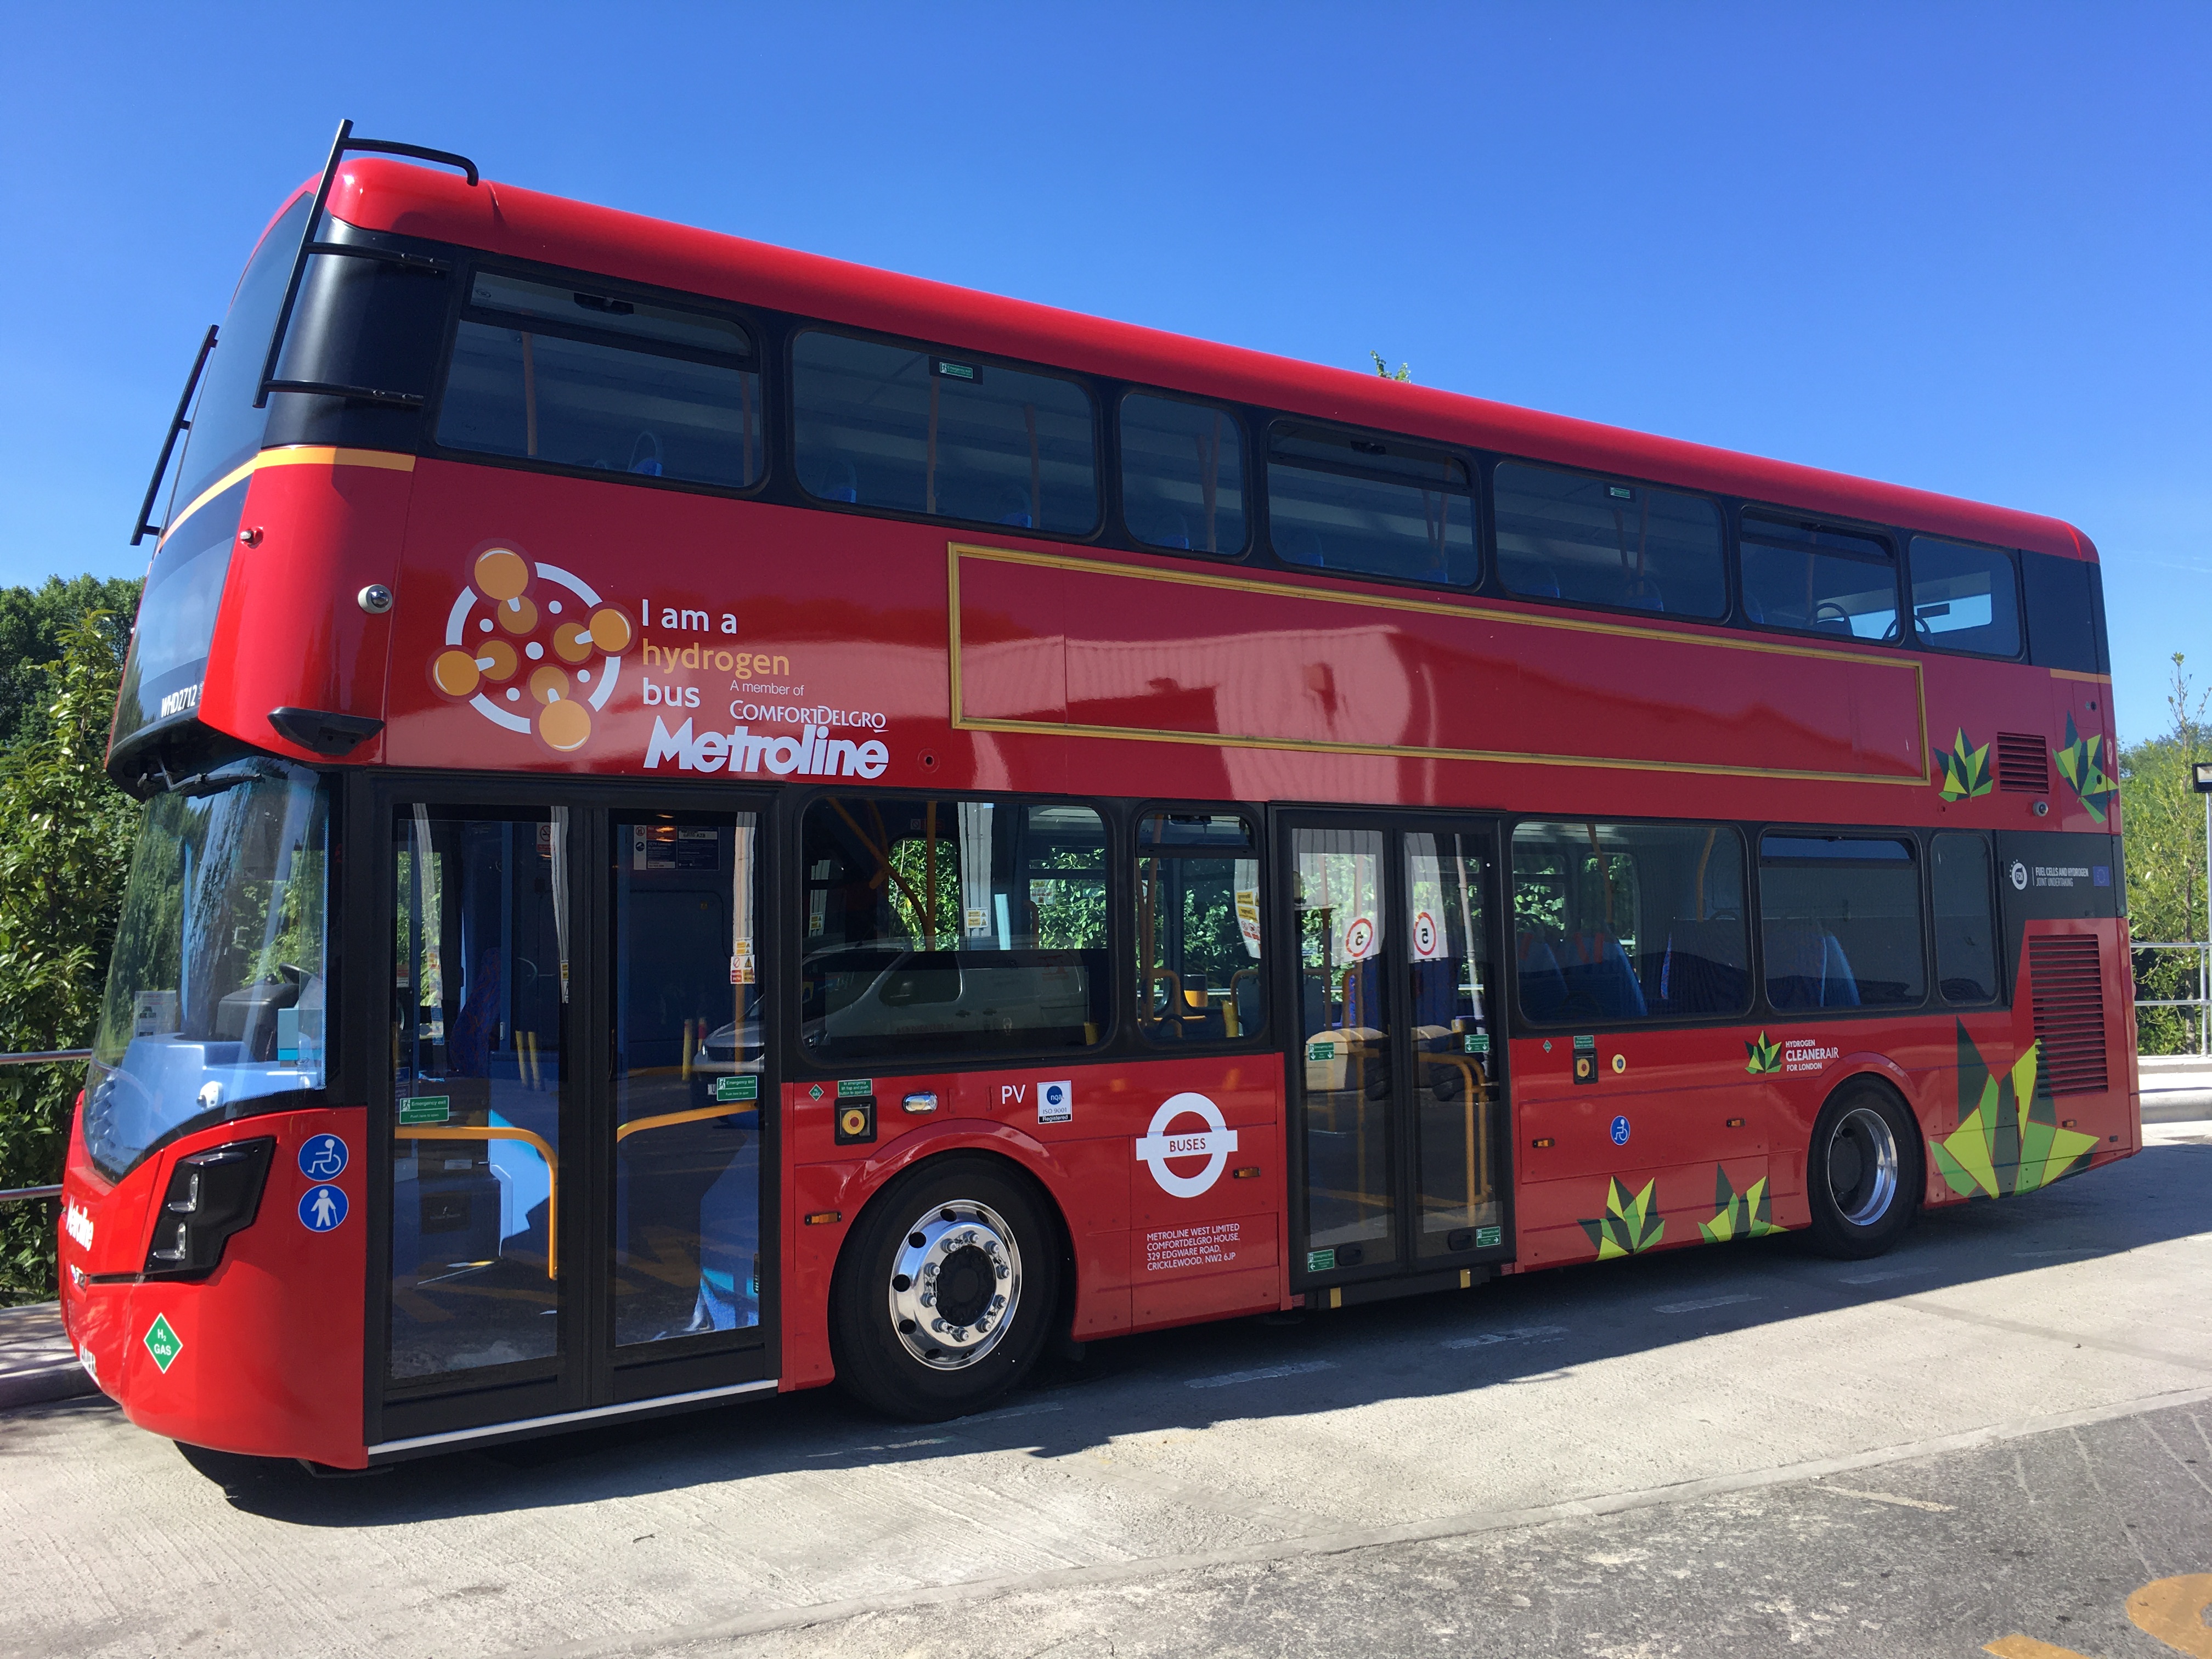 England’s first hydrogen double-deckers launched